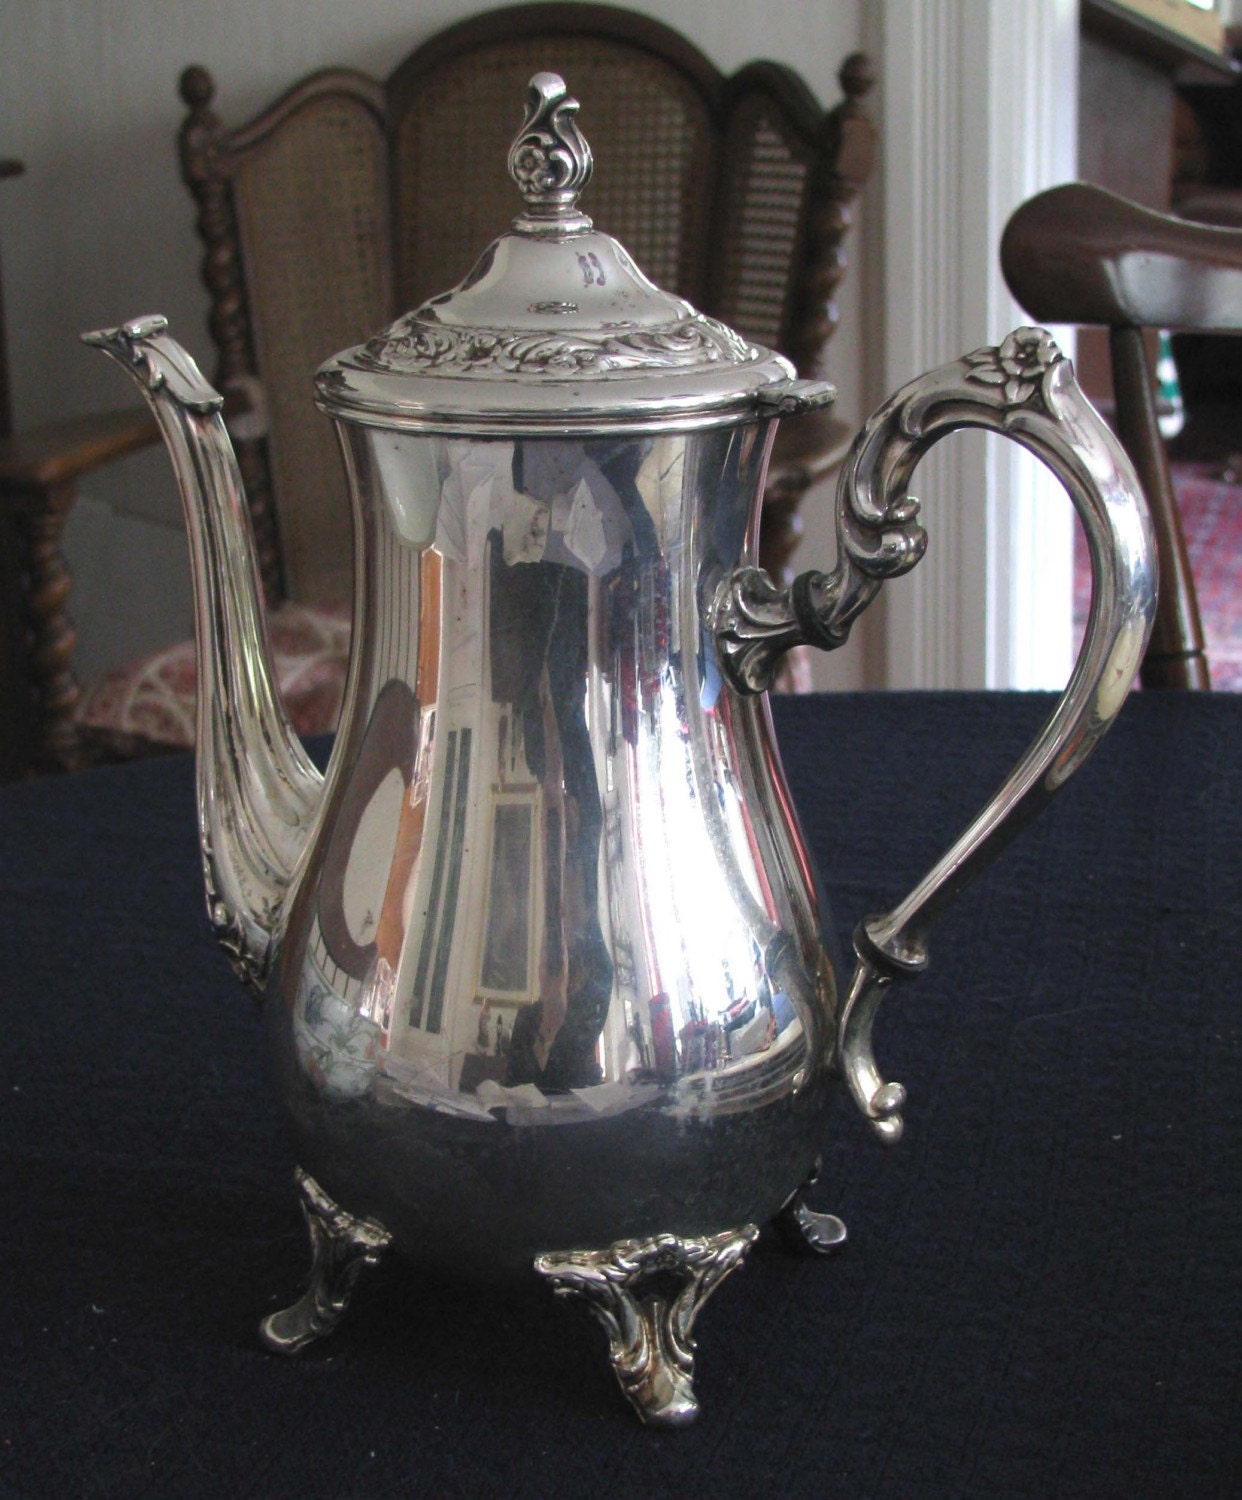 Reduced Wm Rogers Silver Plate Coffee Pot By Myparentsattick